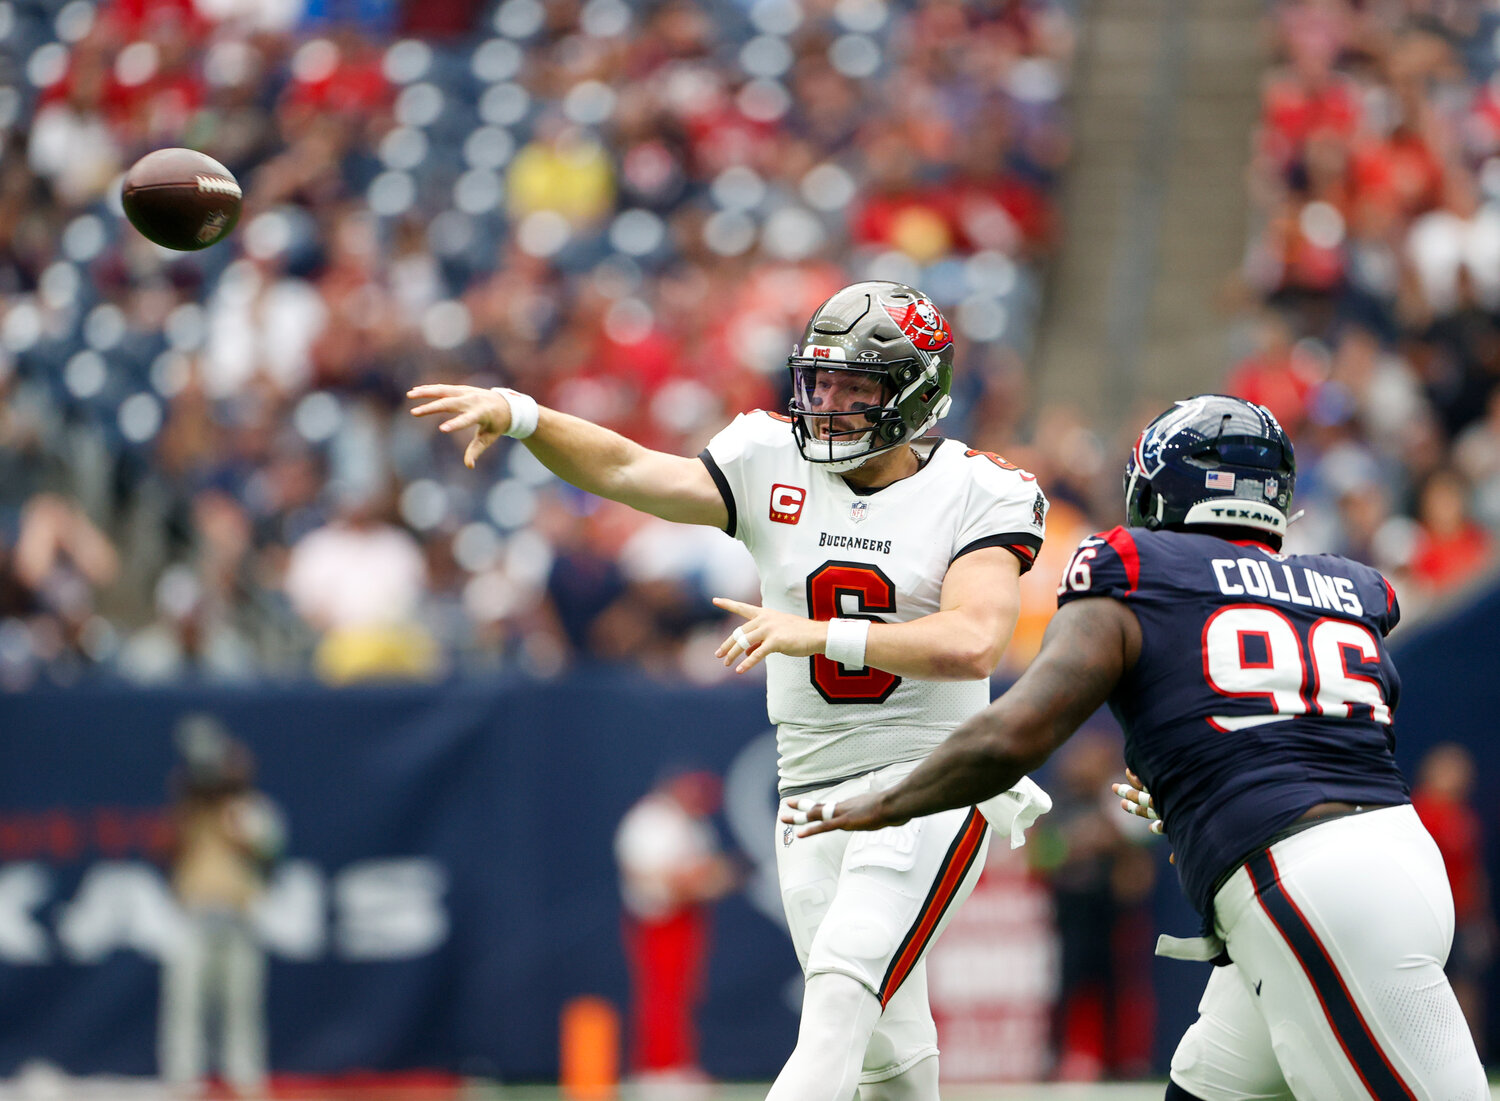 Buccaneers quarterback Baker Mayfield (6) passes the ball under pressure from Texans defensive tackle Maliek Collins (96) during an NFL game between the Houston Texans and the Tampa Bay Buccaneers on November 5, 2023 in Houston.